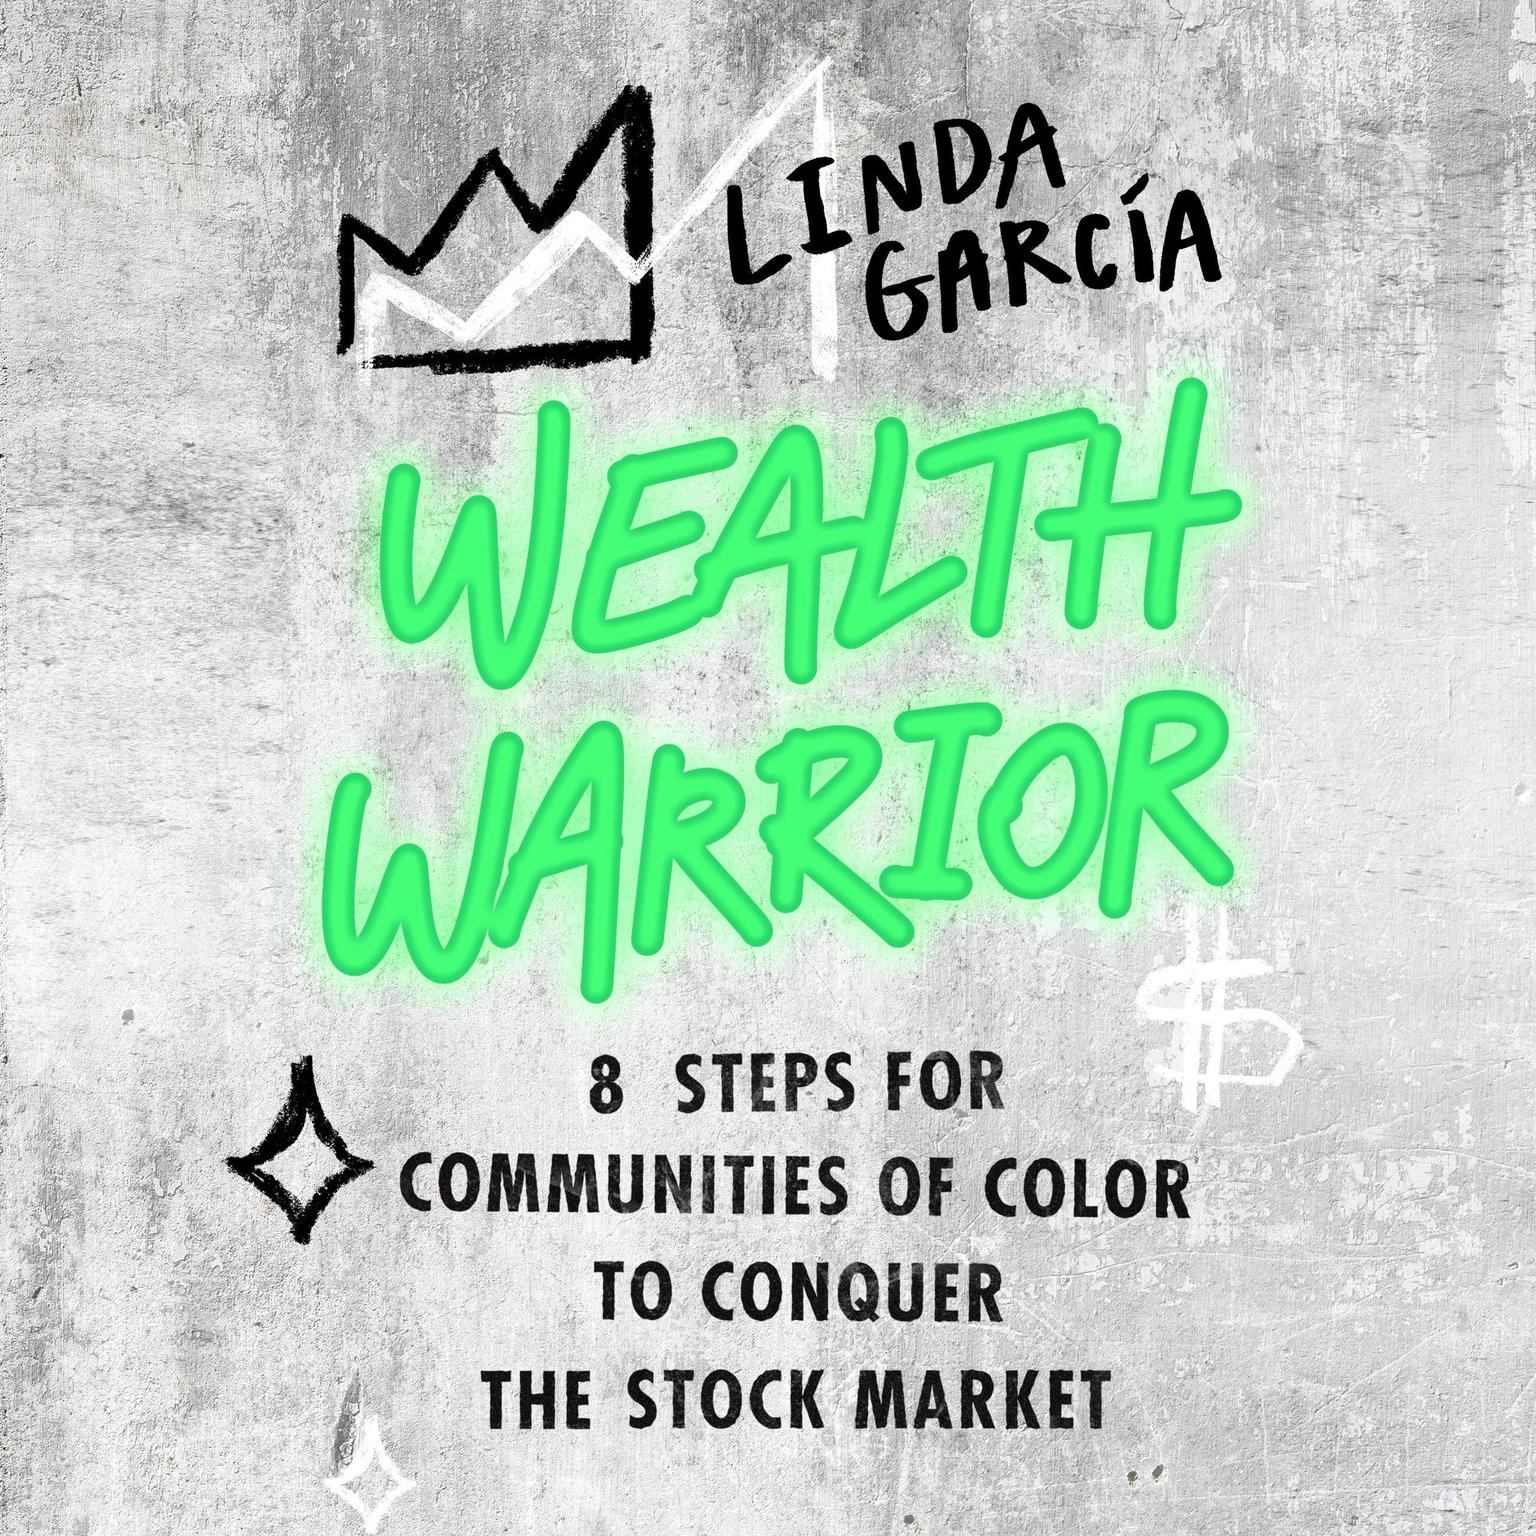 Wealth Warrior: 8 Steps for Communities of Color to Conquer the Stock Market Audiobook, by Linda Garcia